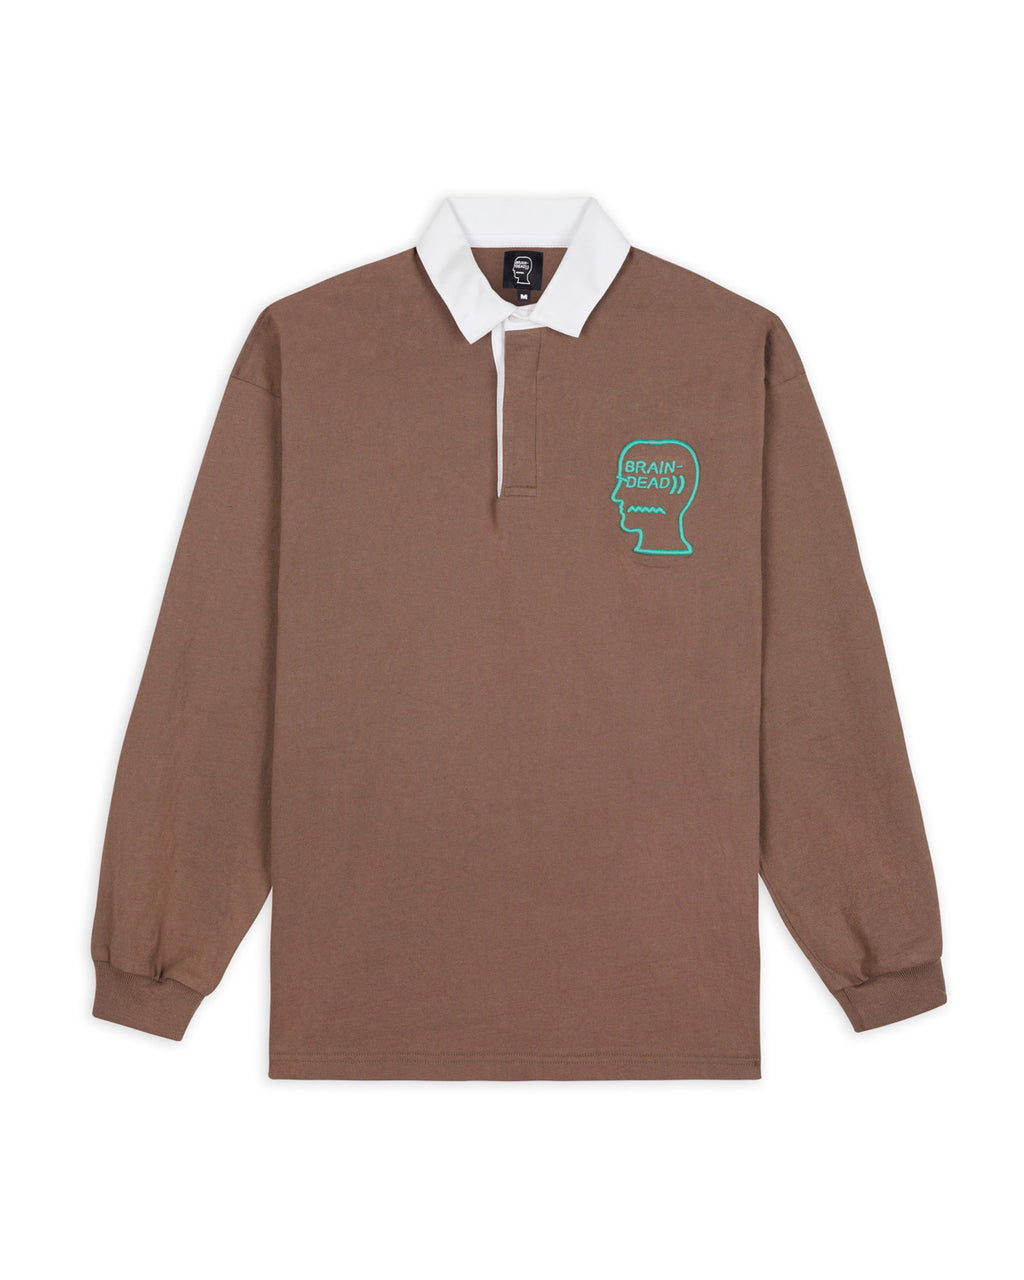 3D Embroidered Logohead Rugby Shirt - Brown